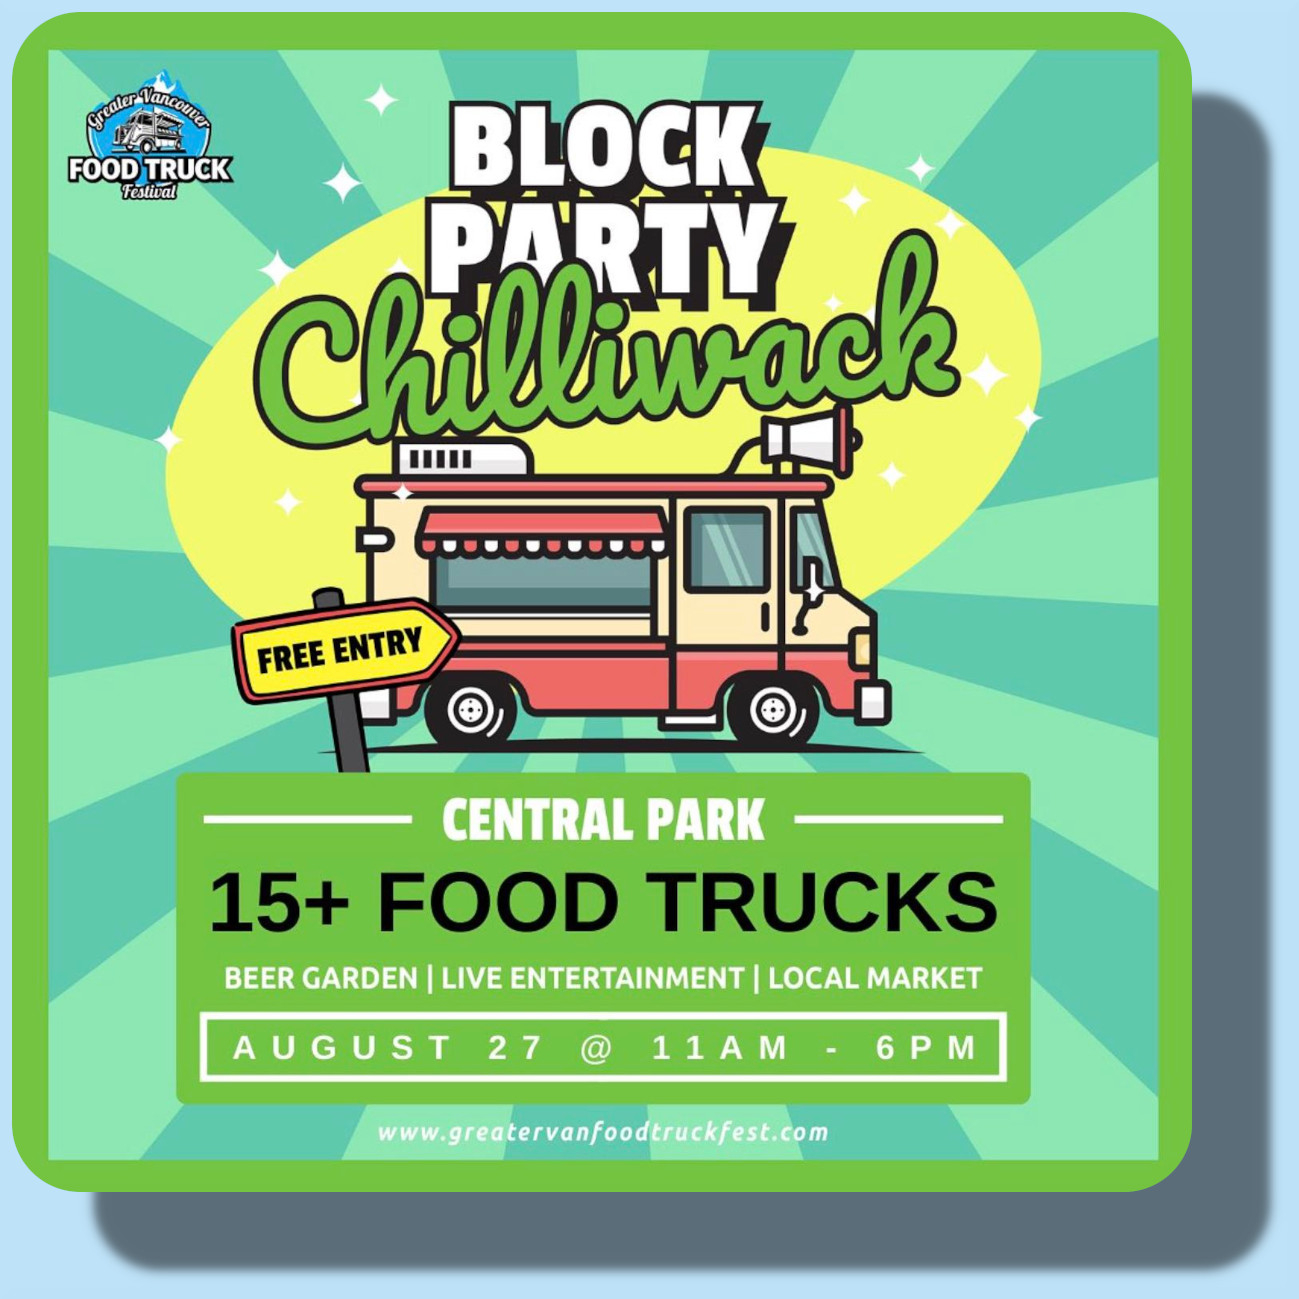 Chilliwack Block Party at Central Park | August 27th